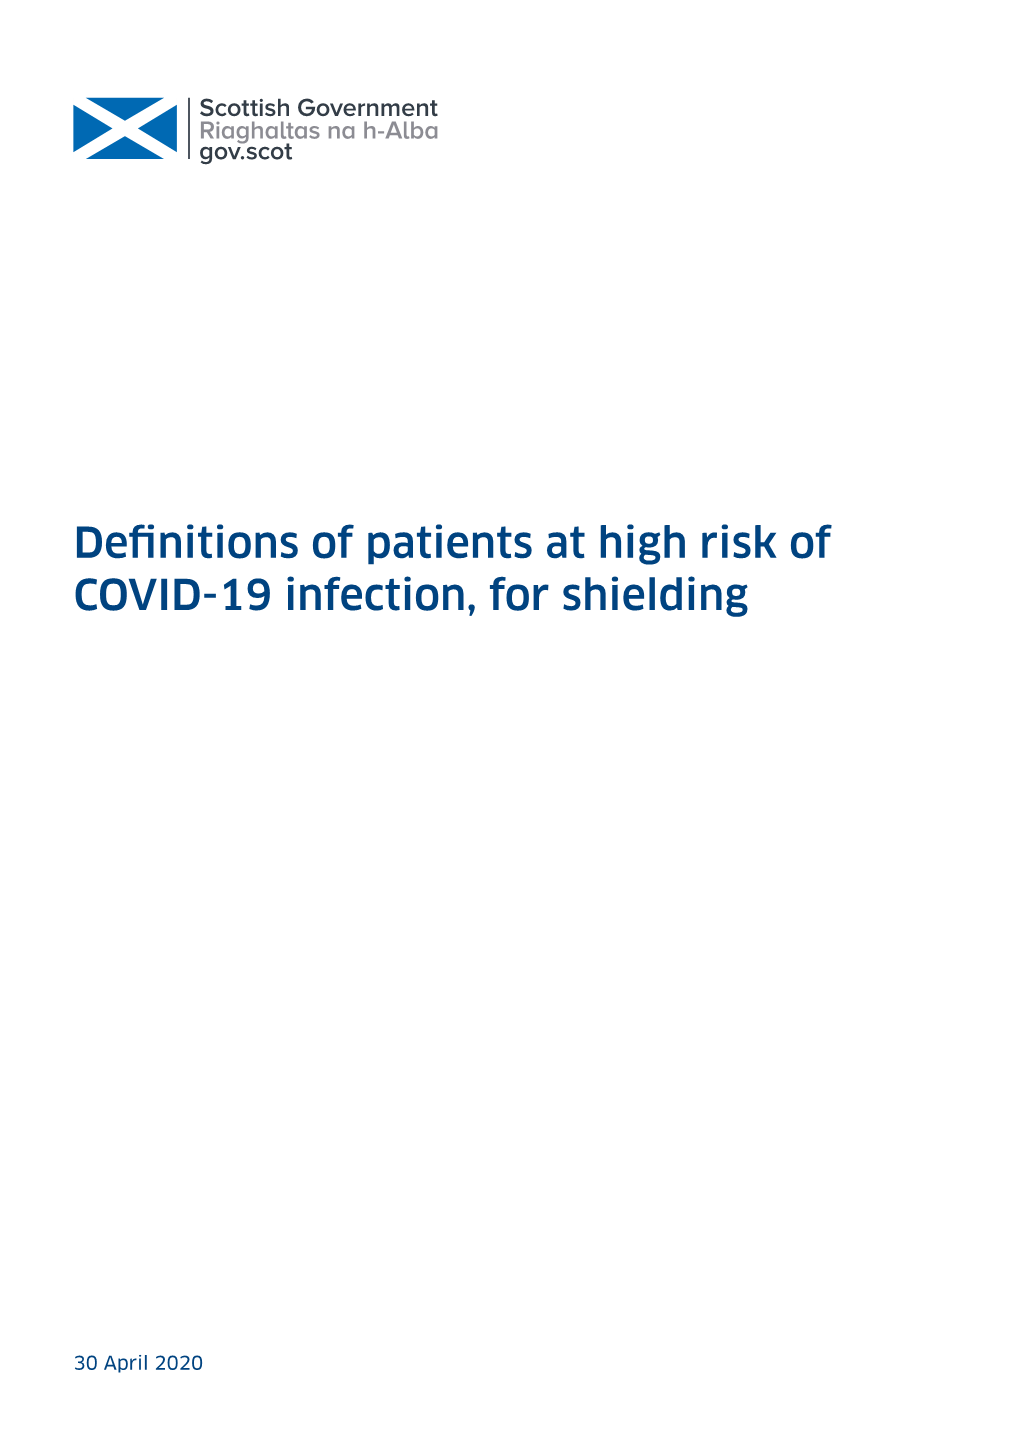 Definitions of Patients at High Risk of COVID-19 Infection, for Shielding